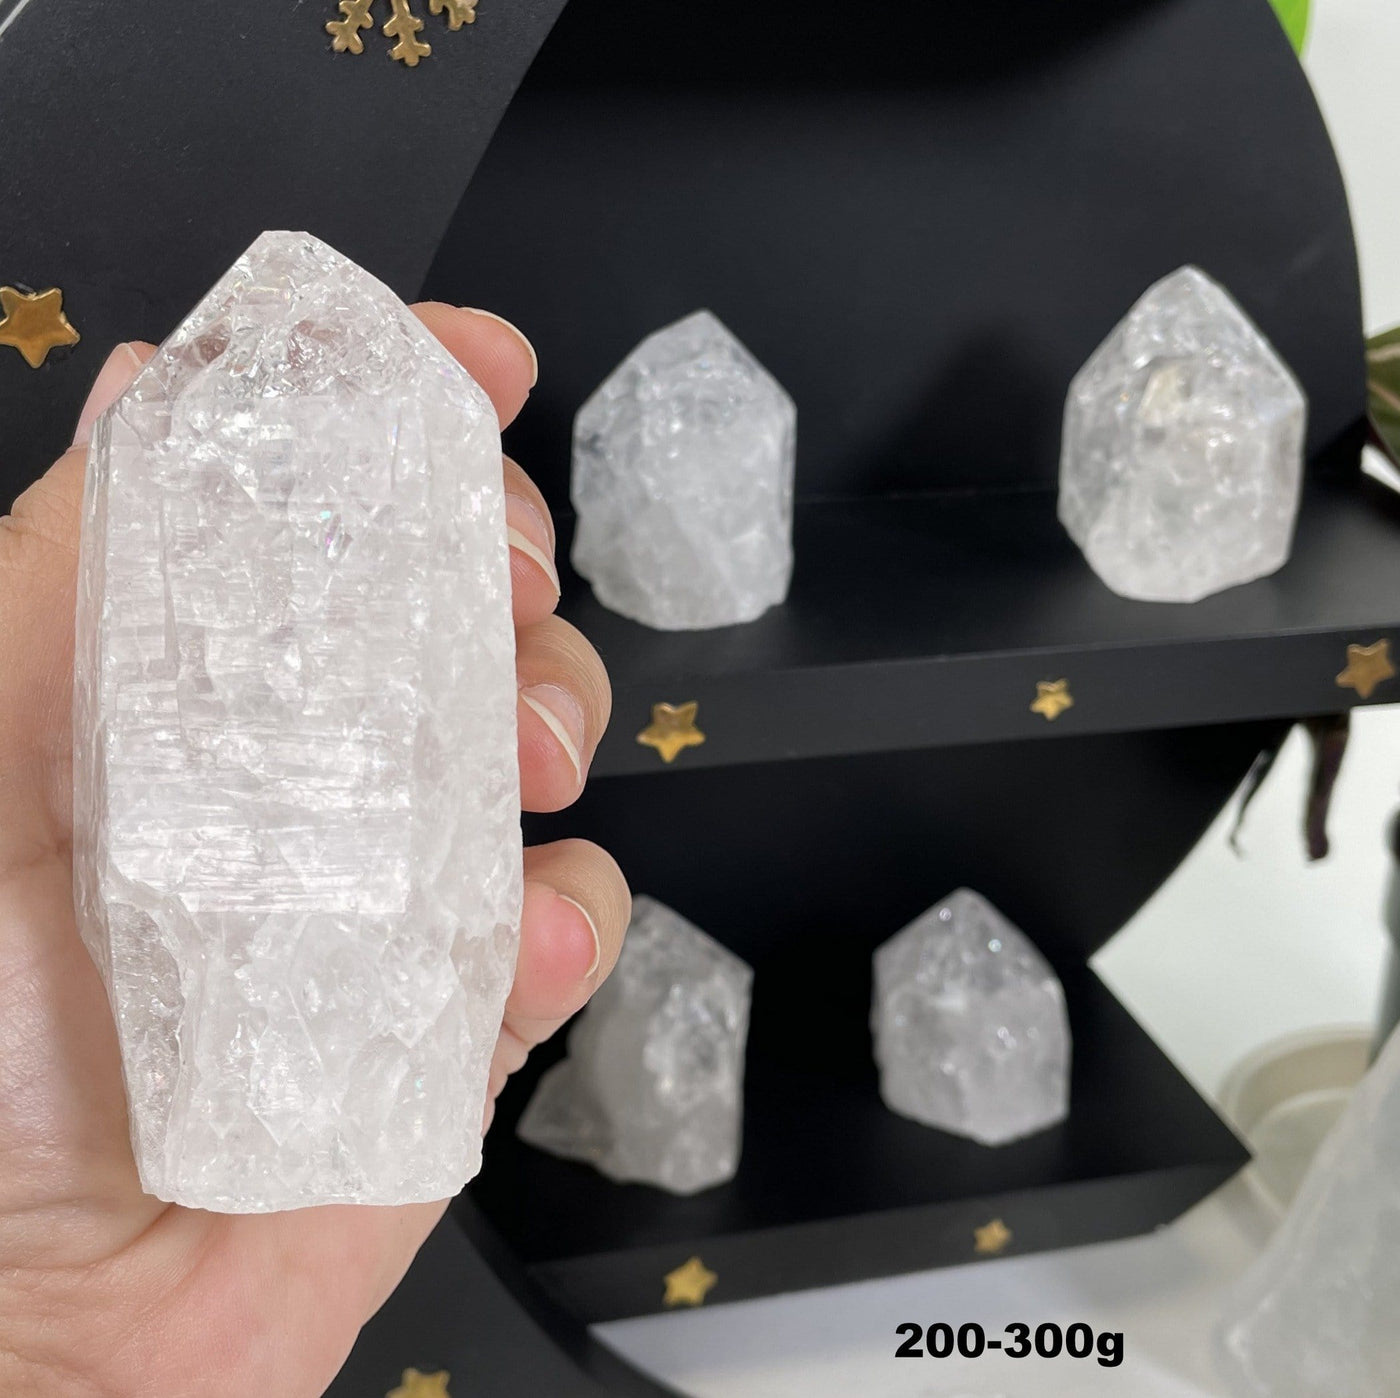 Crackle Quartz Semi-Polished Points in the 200-300g size